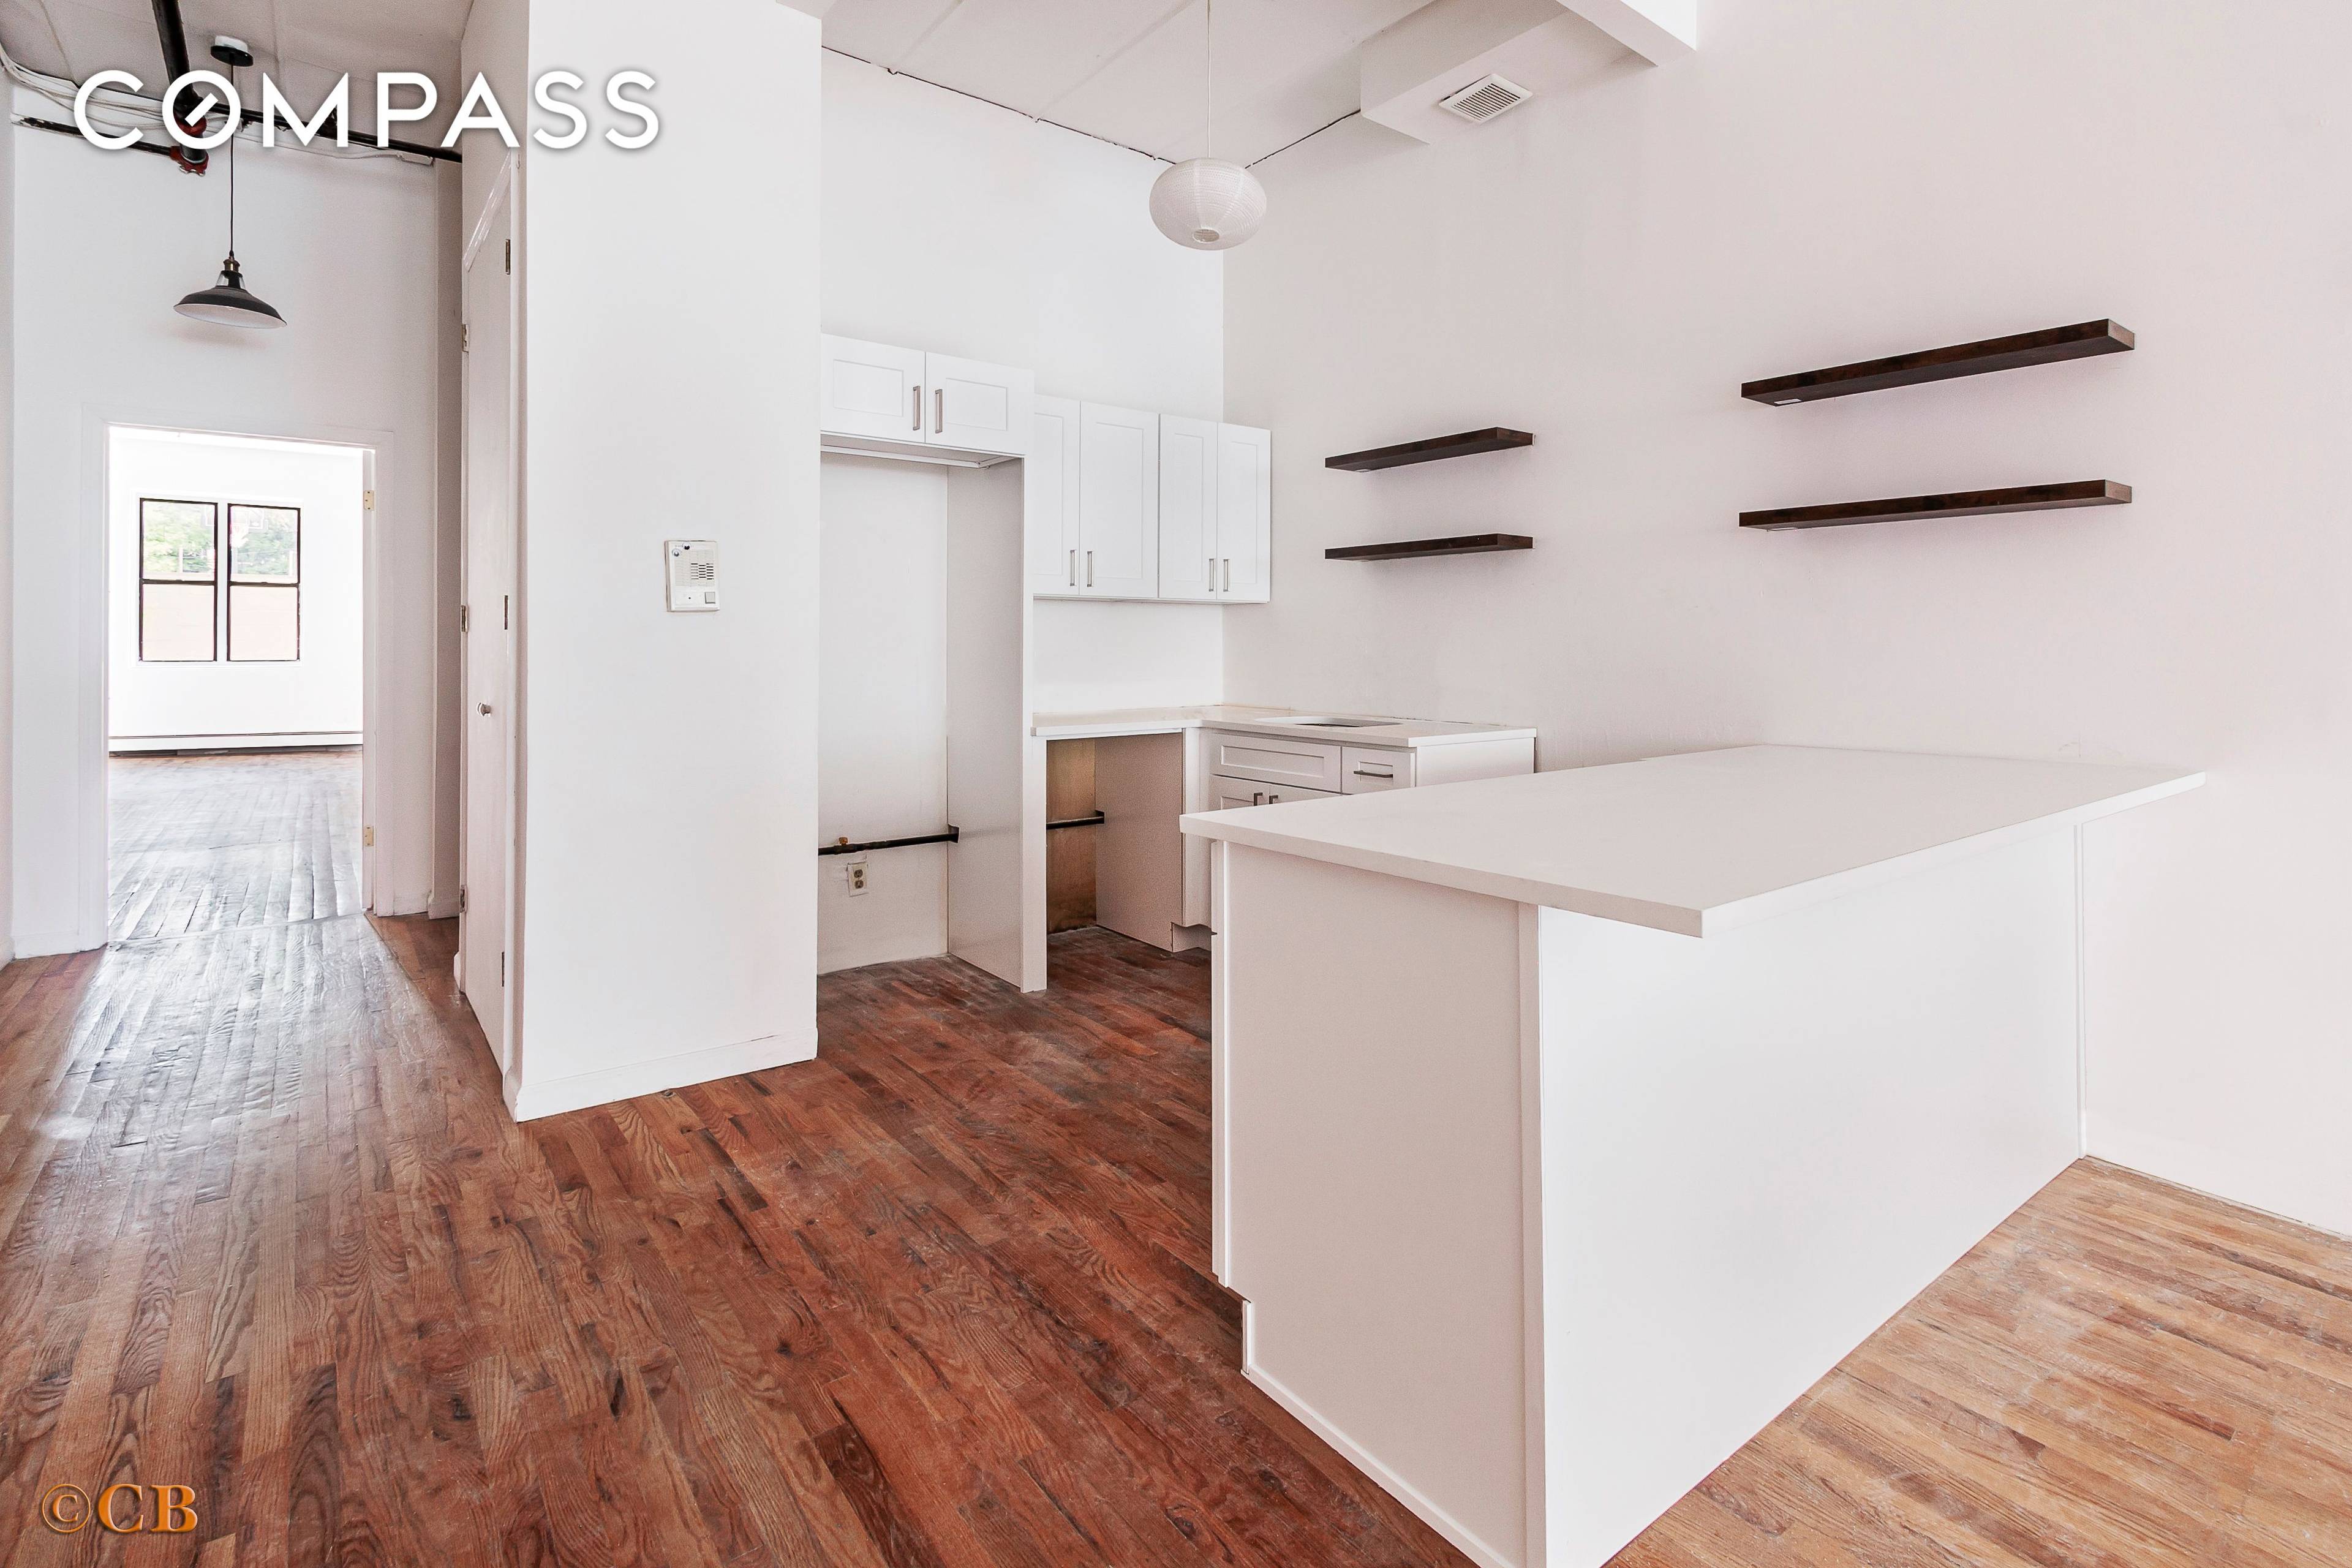 Huge Clinton Hill Loft ! Newly renovated spacious 2 bedroom Loft located at the intersection of Bedford Stuyvesant and Clinton Hill.